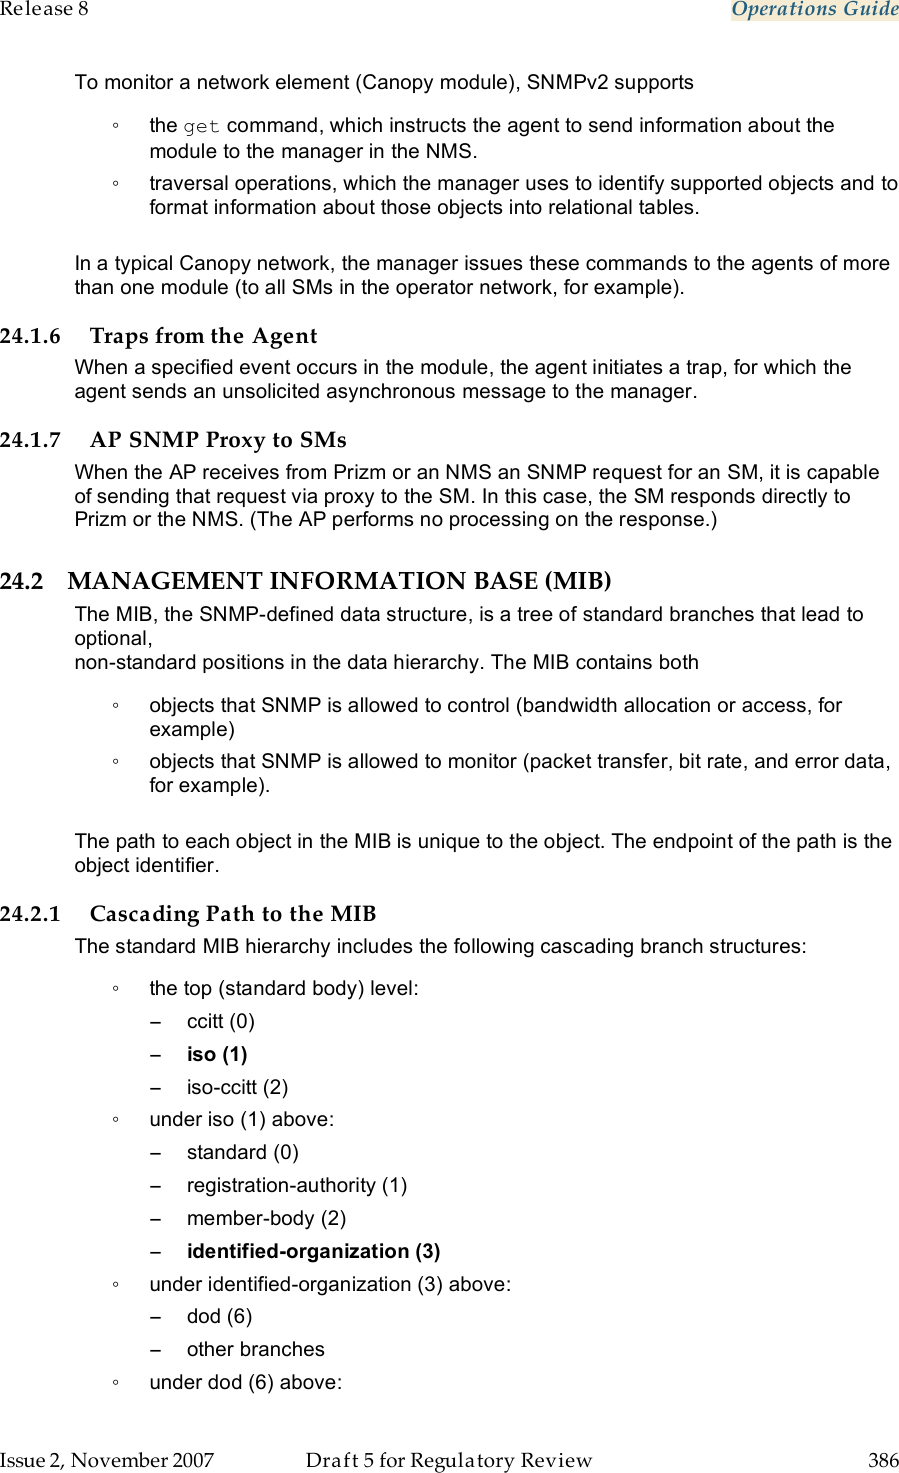 Release 8    Operations Guide   Issue 2, November 2007  Draft 5 for Regulatory Review  386     To monitor a network element (Canopy module), SNMPv2 supports  ◦  the get command, which instructs the agent to send information about the module to the manager in the NMS. ◦  traversal operations, which the manager uses to identify supported objects and to format information about those objects into relational tables.  In a typical Canopy network, the manager issues these commands to the agents of more than one module (to all SMs in the operator network, for example). 24.1.6 Traps from the Agent When a specified event occurs in the module, the agent initiates a trap, for which the agent sends an unsolicited asynchronous message to the manager. 24.1.7 AP SNMP Proxy to SMs When the AP receives from Prizm or an NMS an SNMP request for an SM, it is capable of sending that request via proxy to the SM. In this case, the SM responds directly to Prizm or the NMS. (The AP performs no processing on the response.) 24.2 MANAGEMENT INFORMATION BASE (MIB) The MIB, the SNMP-defined data structure, is a tree of standard branches that lead to optional,  non-standard positions in the data hierarchy. The MIB contains both  ◦  objects that SNMP is allowed to control (bandwidth allocation or access, for example)  ◦  objects that SNMP is allowed to monitor (packet transfer, bit rate, and error data, for example).   The path to each object in the MIB is unique to the object. The endpoint of the path is the object identifier. 24.2.1 Cascading Path to the MIB The standard MIB hierarchy includes the following cascading branch structures: ◦  the top (standard body) level: −  ccitt (0) − iso (1) −  iso-ccitt (2) ◦  under iso (1) above: −  standard (0) −  registration-authority (1) −  member-body (2) − identified-organization (3) ◦  under identified-organization (3) above: −  dod (6) −  other branches ◦  under dod (6) above: 